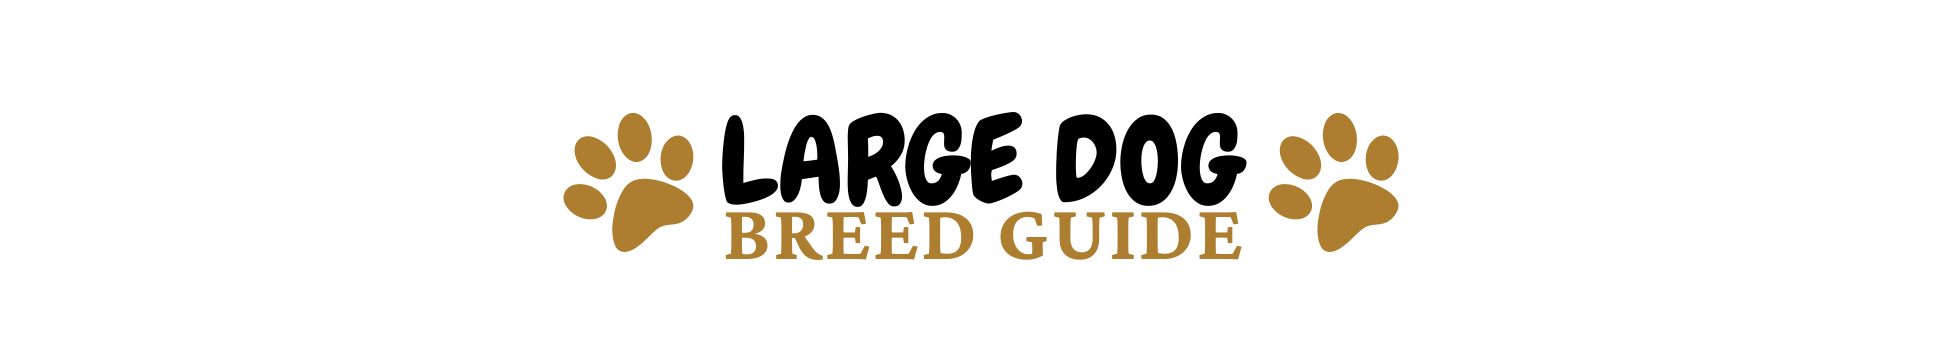 Large Dog Breed Guide